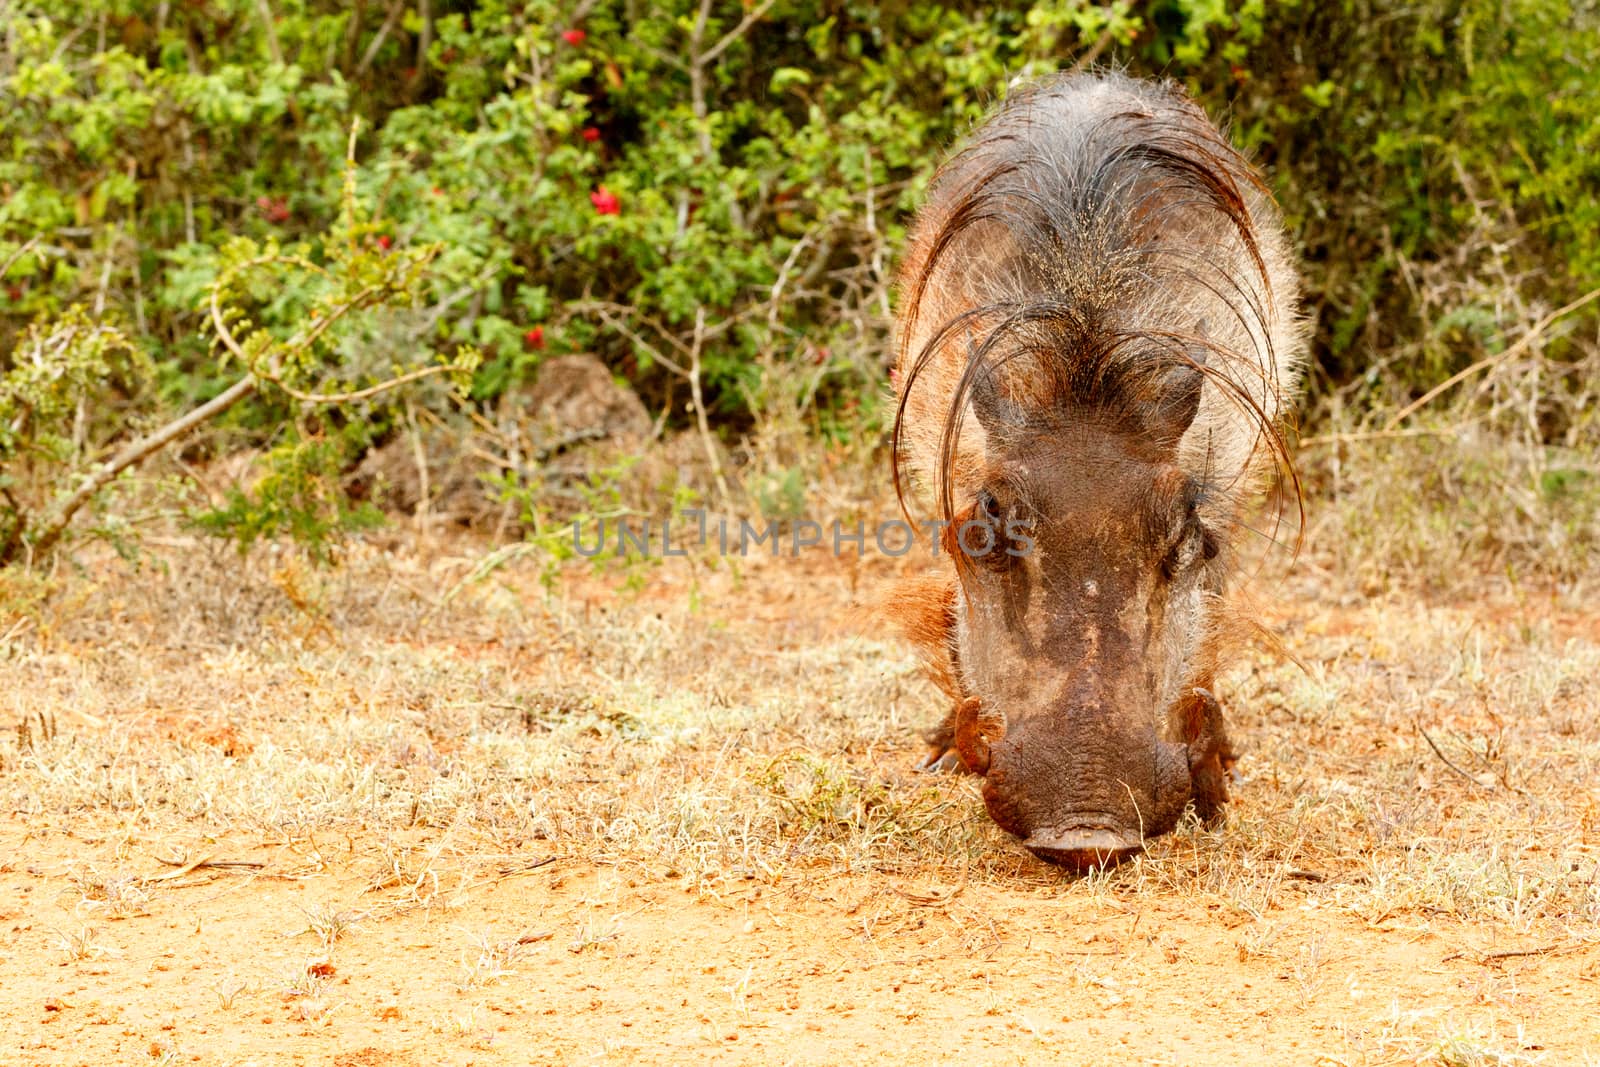 Front view of a common warthog in the field.